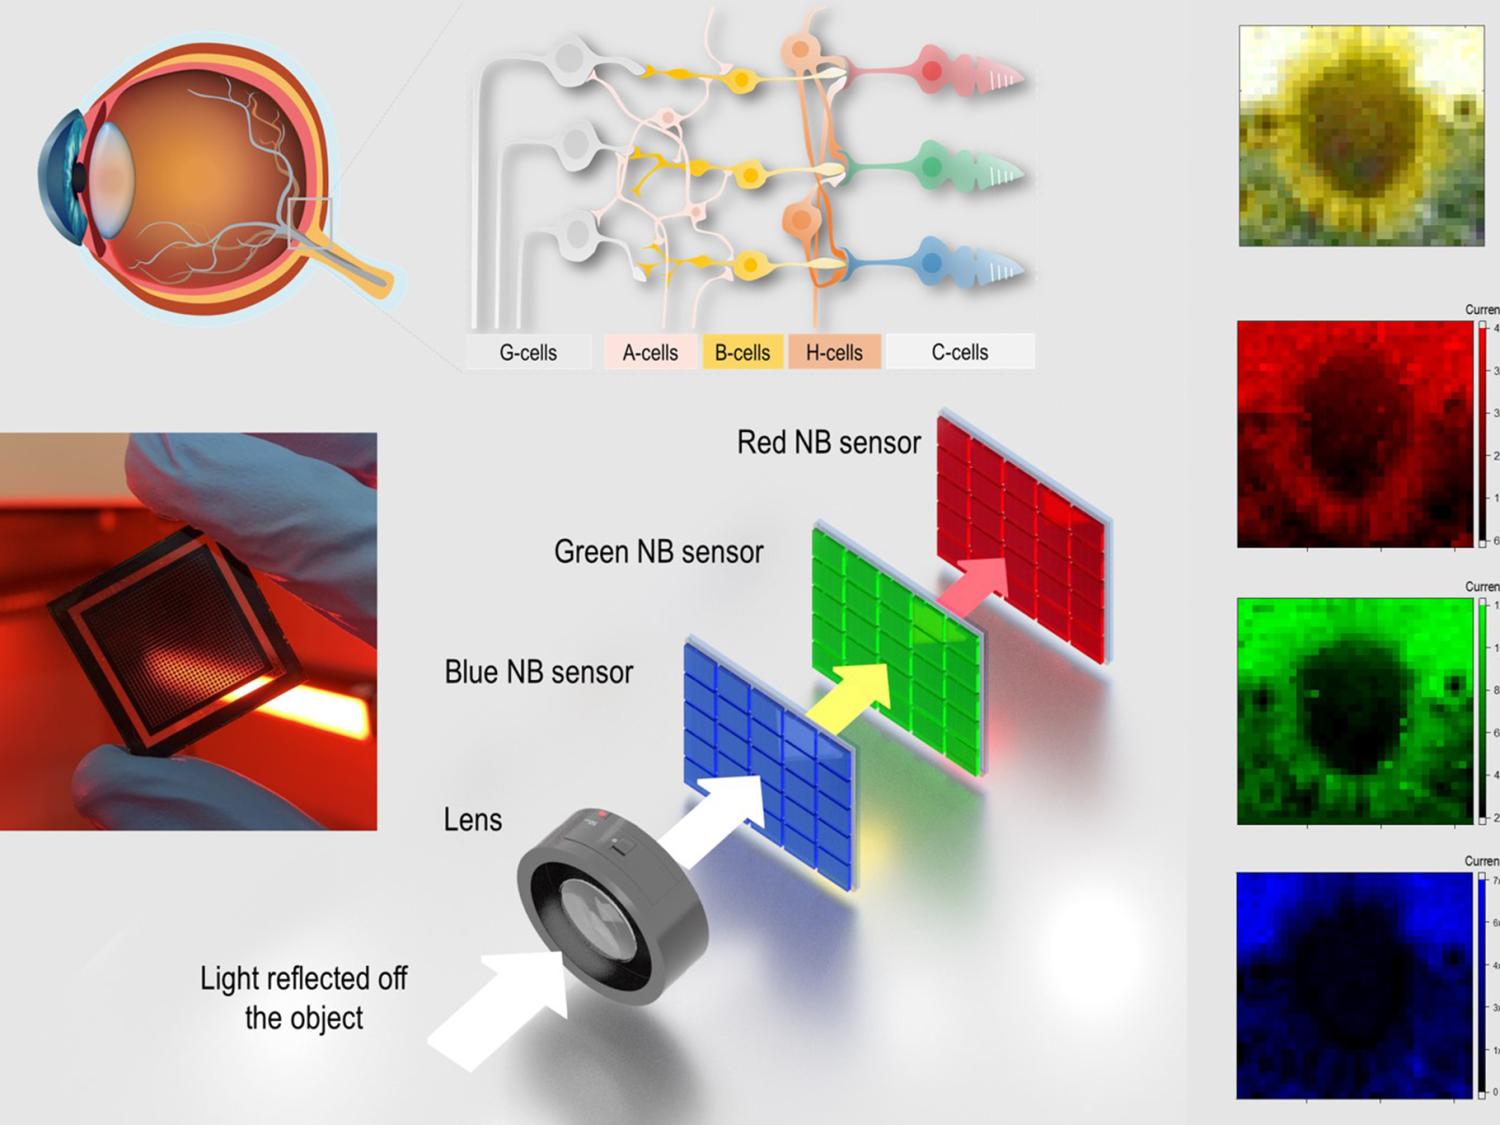 This image shows how a new retina-inspired narrowband photodetector works